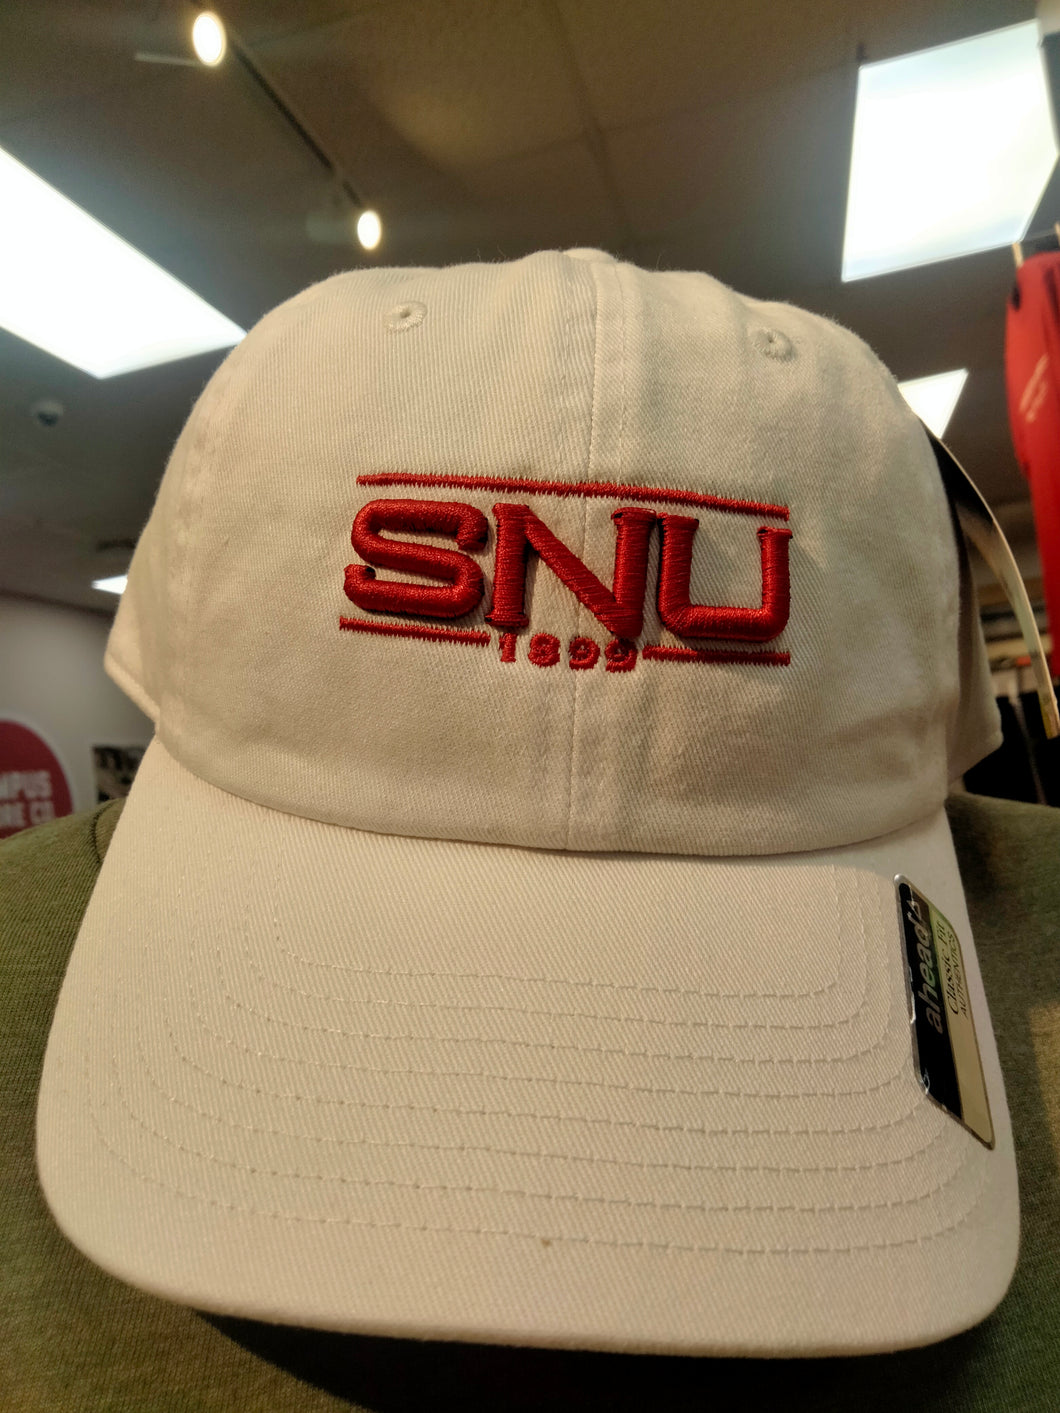 Classic Washed Twill SNU 1899 Hat, White